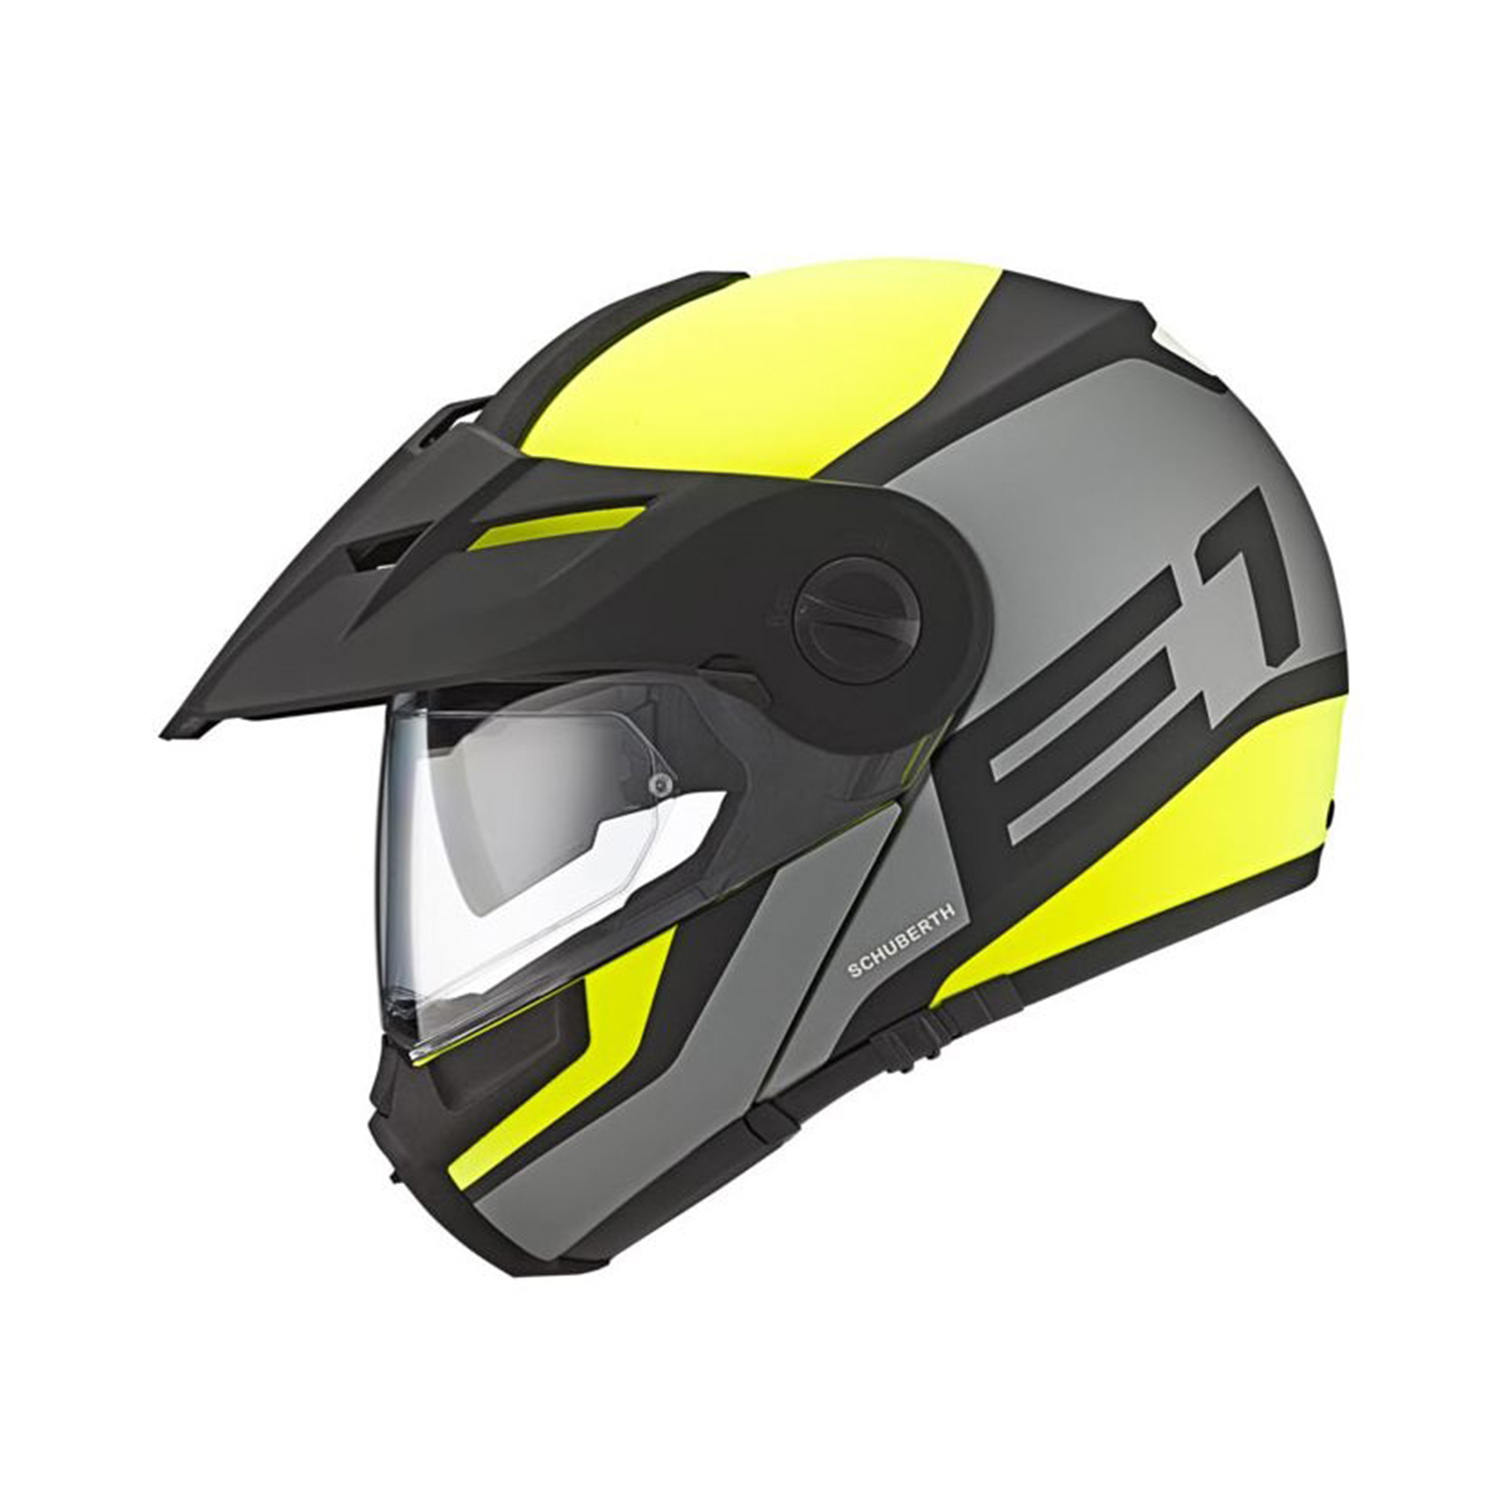 Schuberth E1 Adventure Helmet Guardian Yellow - Available in Various Sizes